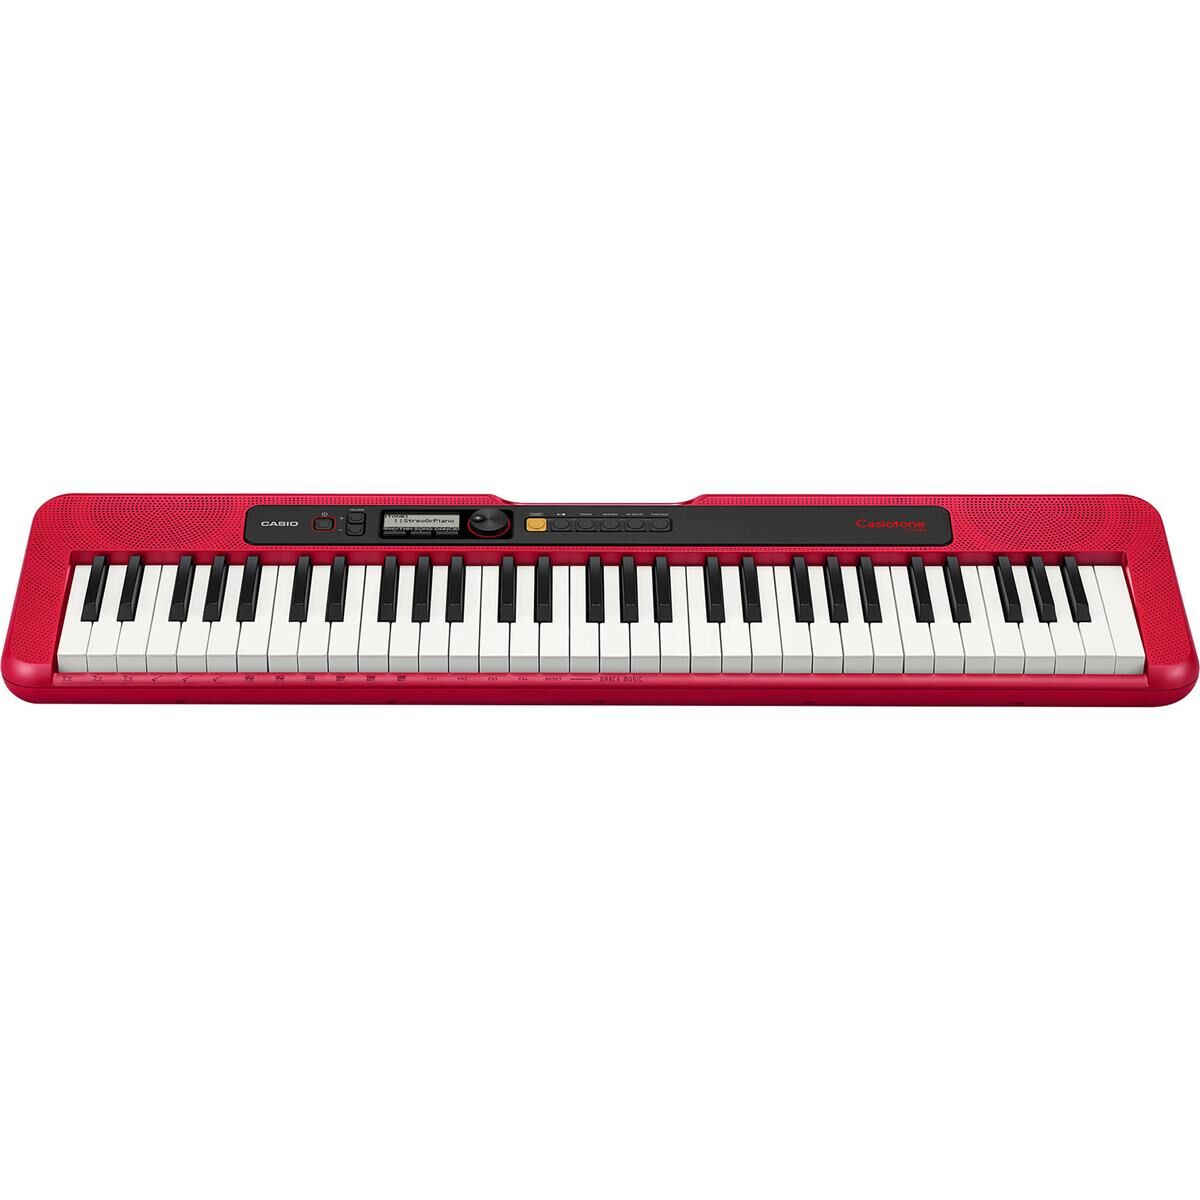 Casio CT-S200 61-Key Digital Piano Style Portable Keyboard with 400 Tones, Red